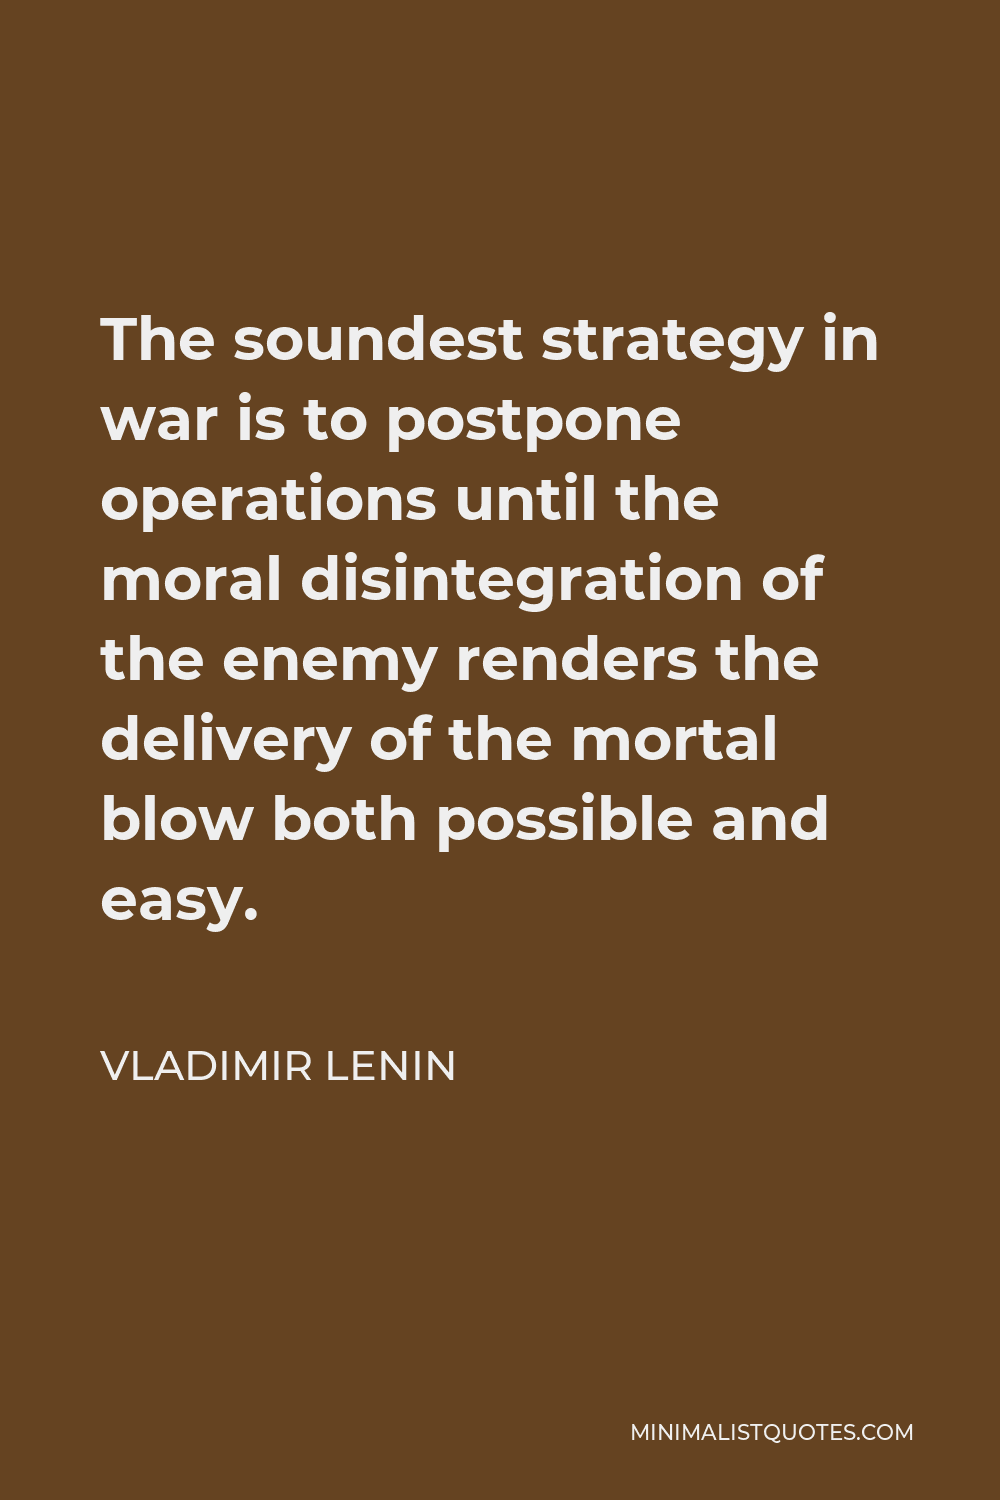 Vladimir Lenin Quote - The soundest strategy in war is to postpone operations until the moral disintegration of the enemy renders the delivery of the mortal blow both possible and easy.